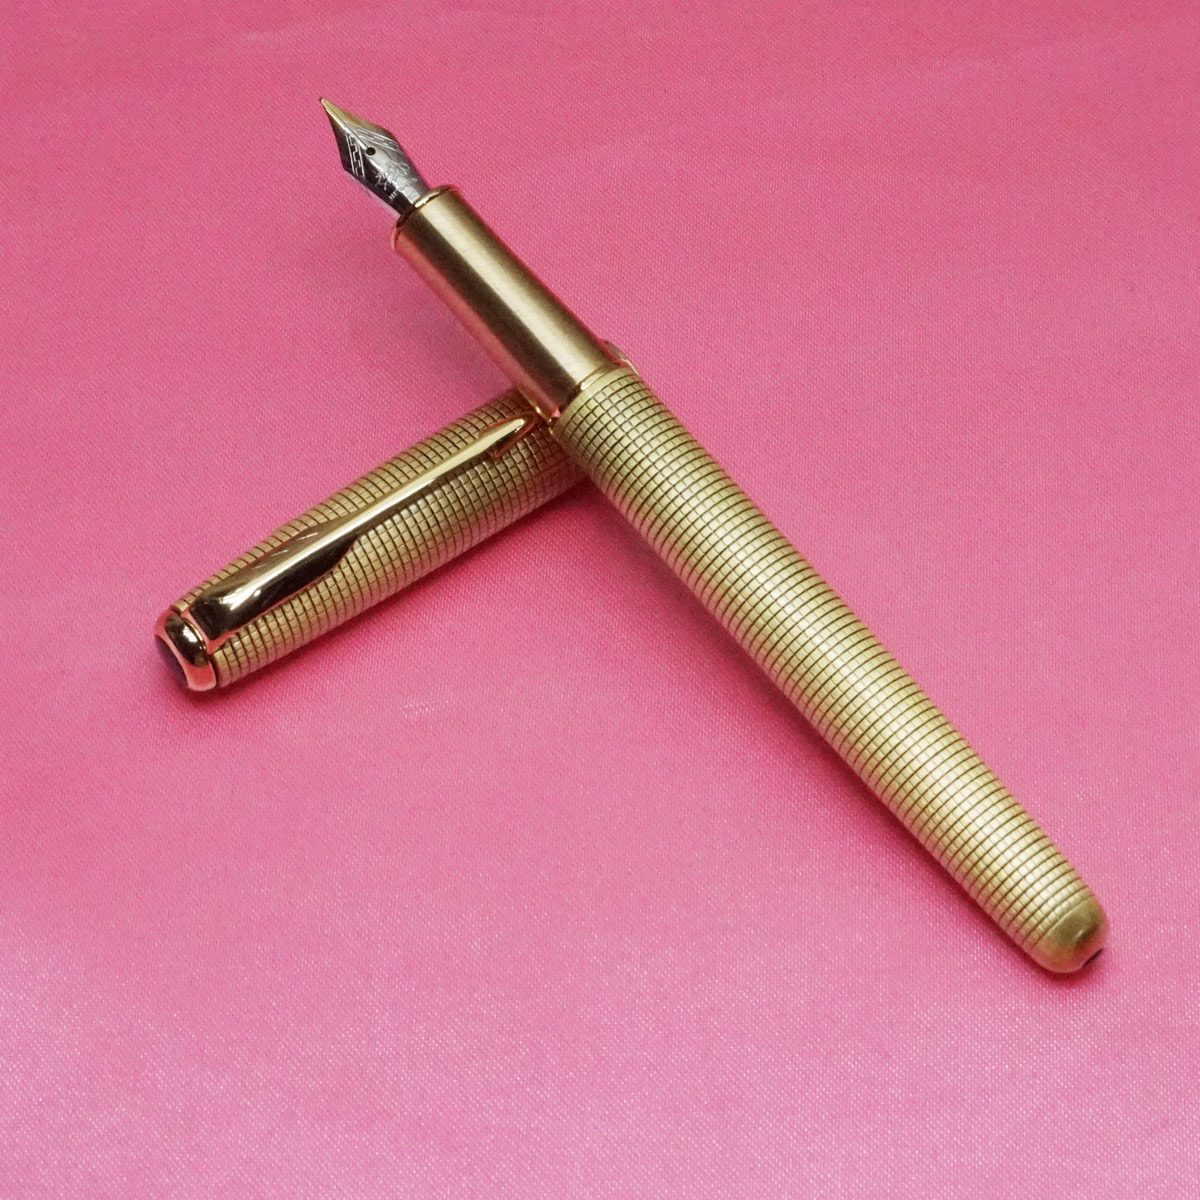 Jinhao 51 Gold Body and Cap Sonnet Type Convertor Type Fountain pen SKU 21994